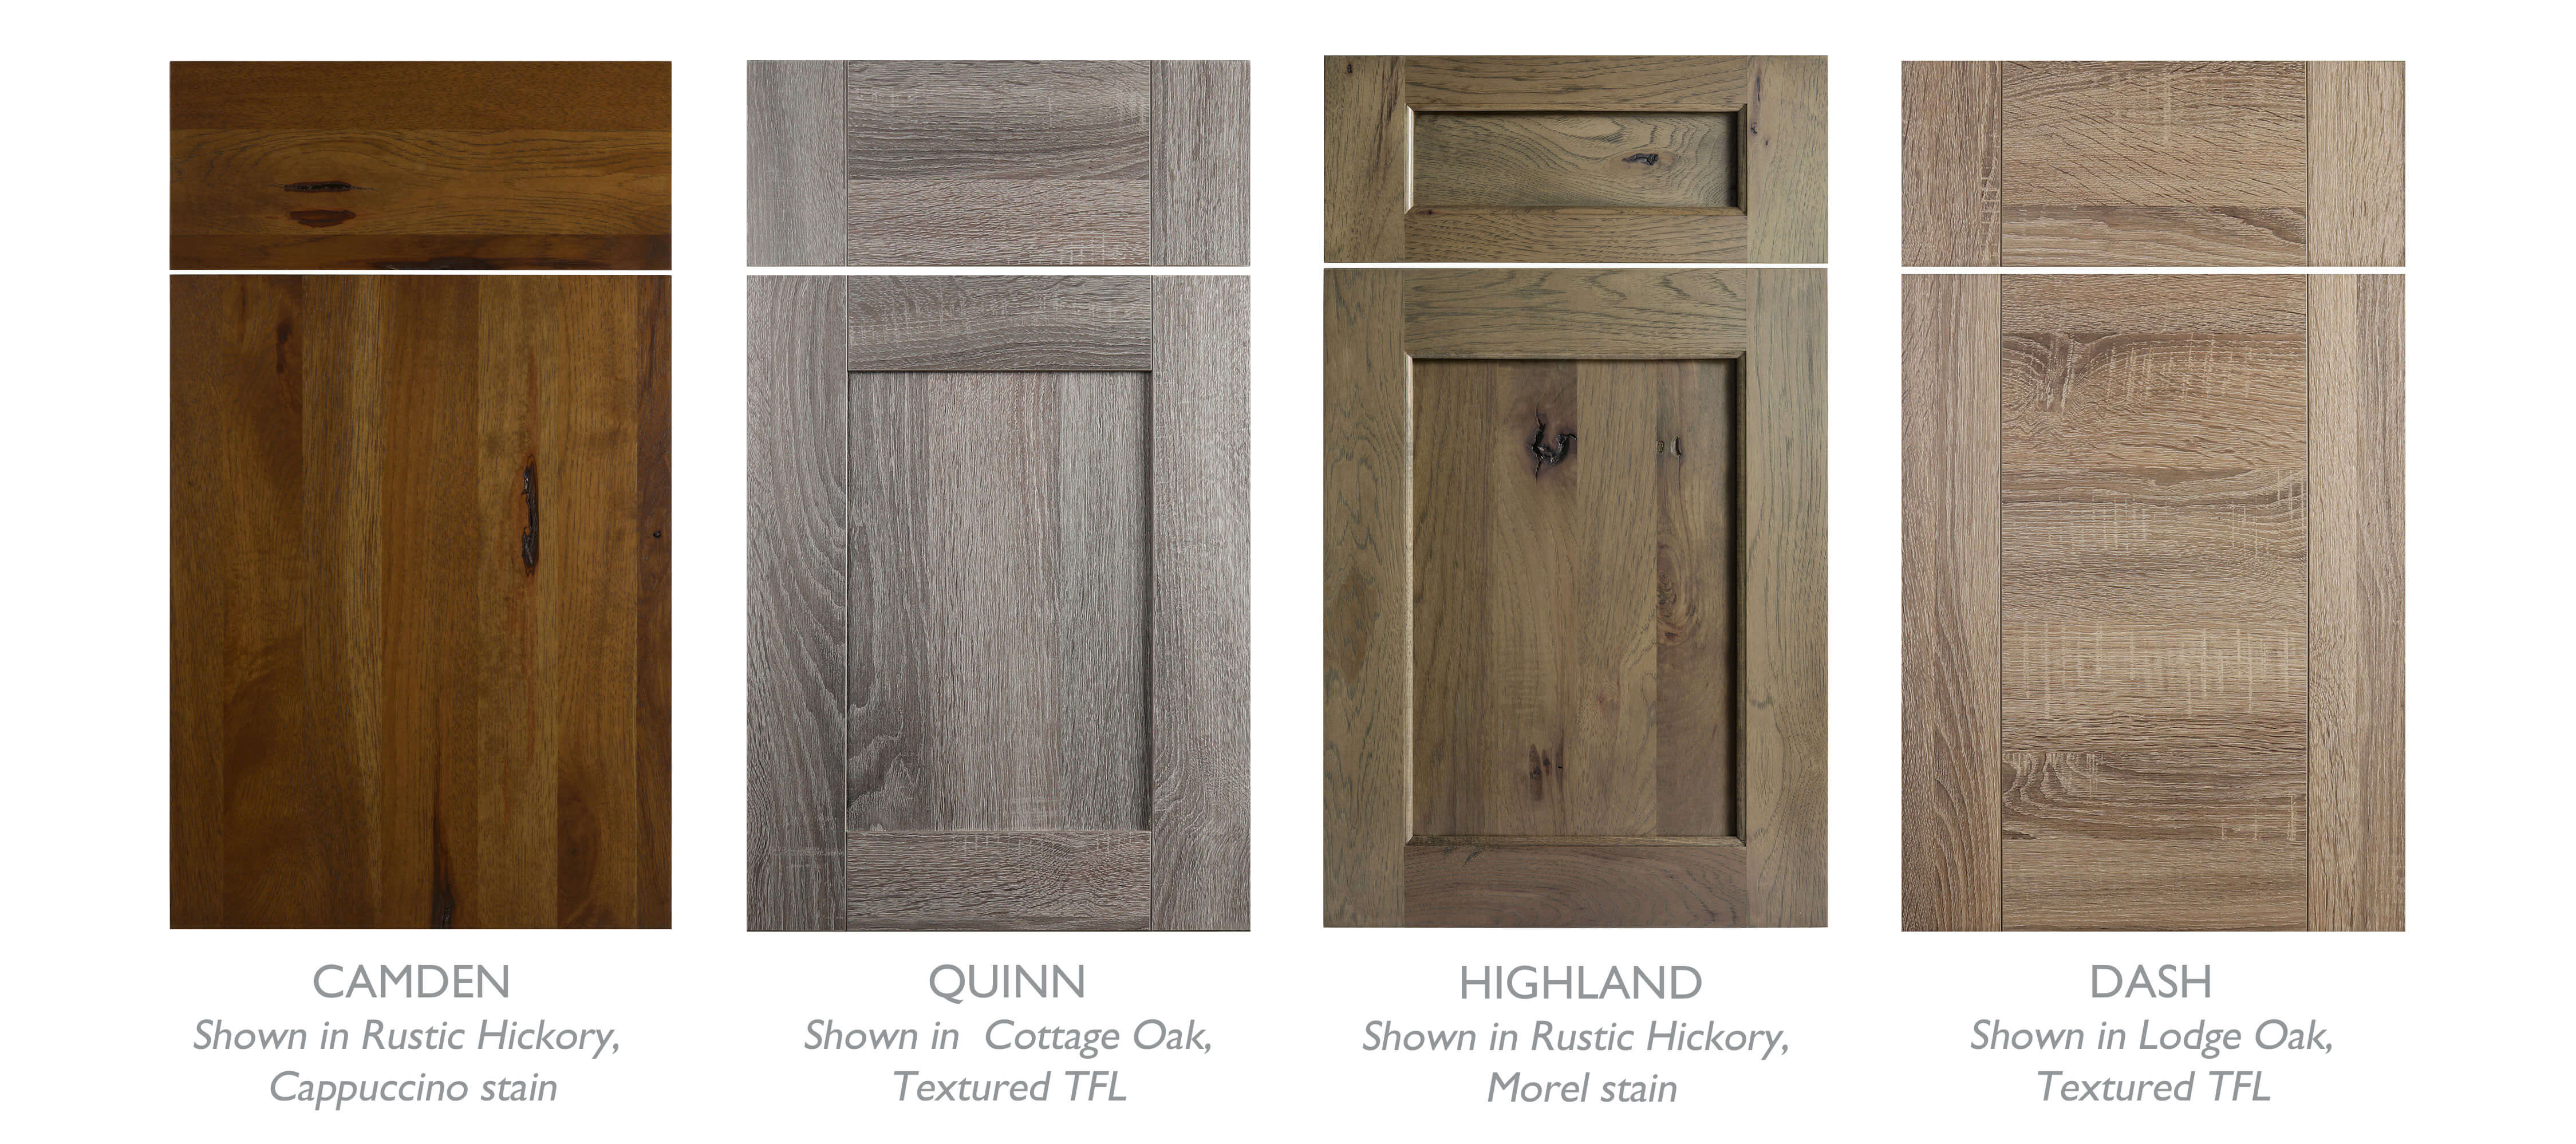 Modern Rustic style cabinet door styles with rustic finishes from Dura Supreme Cabinetry.